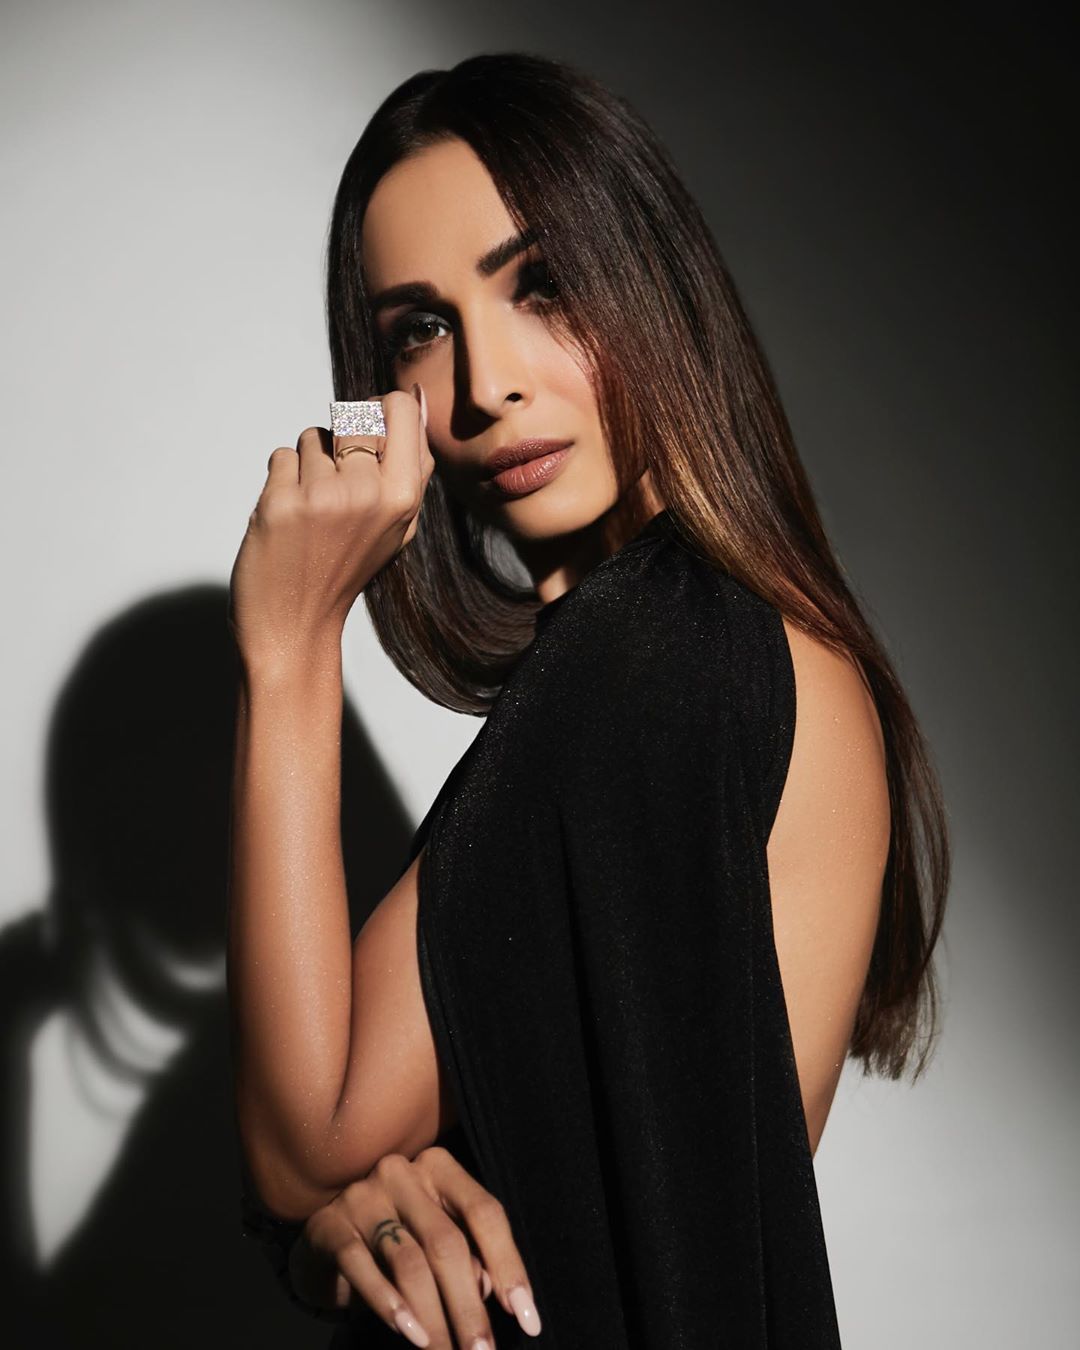 Malaika Arora Feels Her Iconic Number 'Chaiyya Chaiyya' Should Never Be Remixed: Don't Tamper, Just Let The Original Be